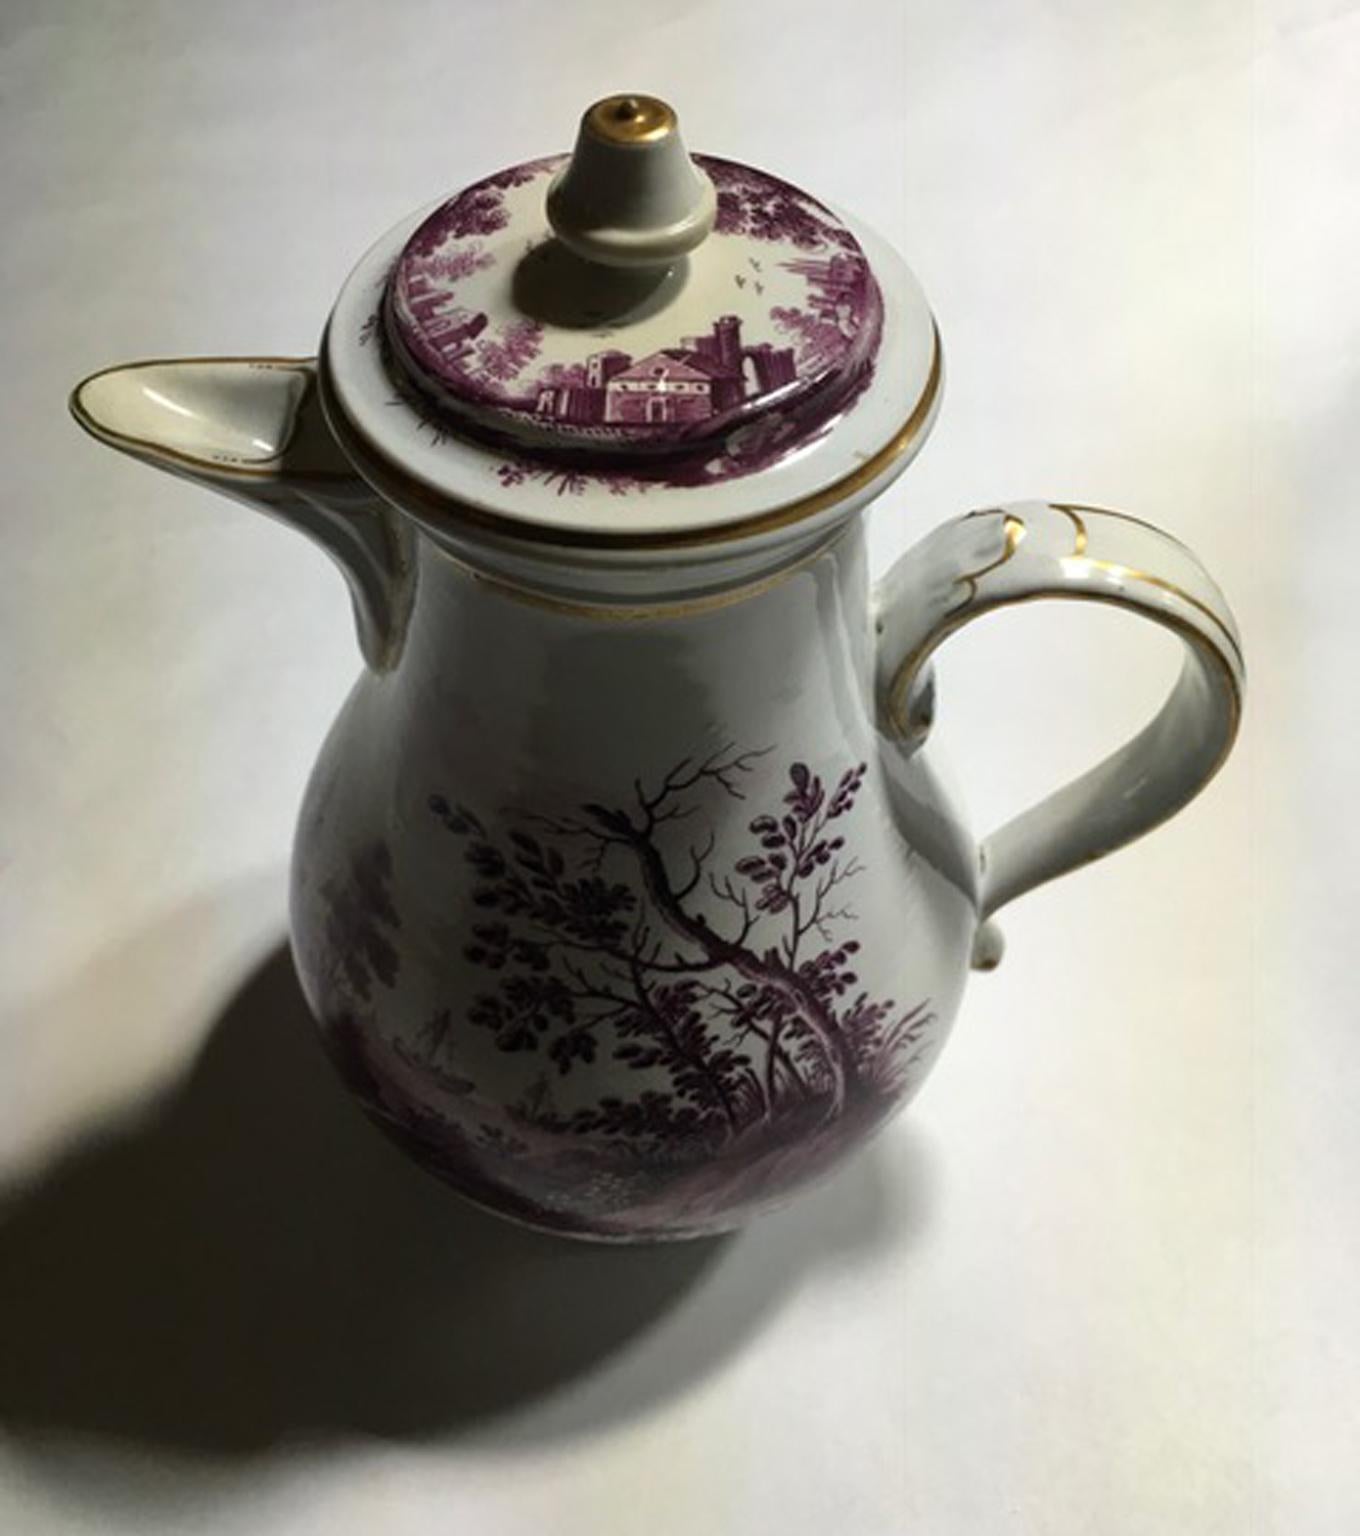 Italy Richard Ginori Mid-18th Century Porcelain Coffee Pot Landscapes in Purple For Sale 1